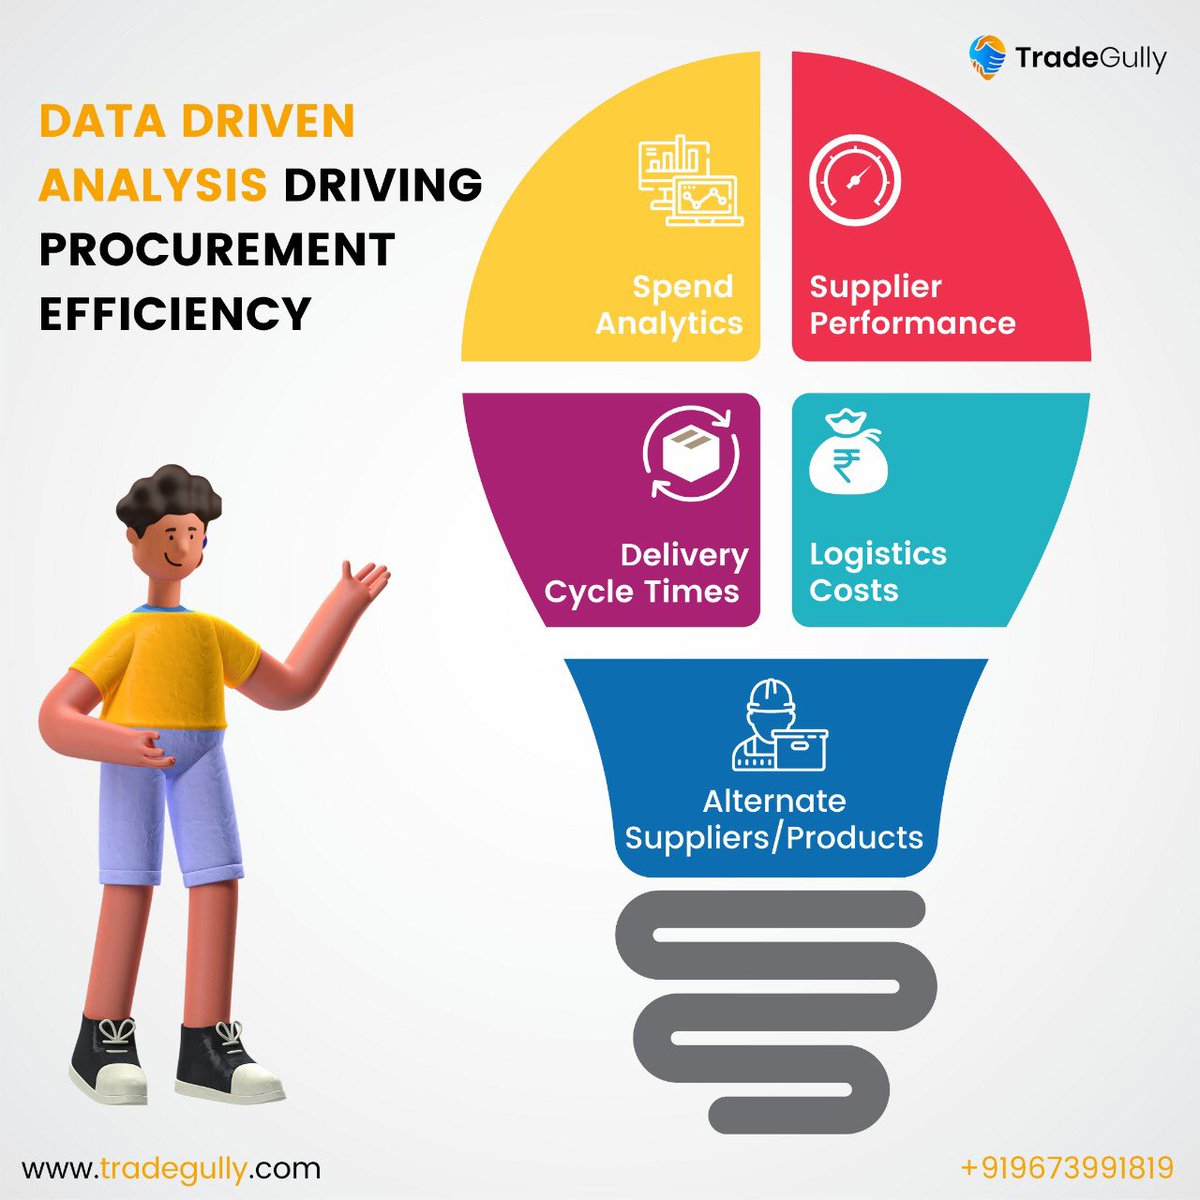 Data is the most important tool for #Procurement optimisation, just as it is for #businessdecision making. Fortunately, we at TradeGully have already solved for the most important challenge of sourcing - identifying #crediblesuppliers, through #datadrivenanalytics.